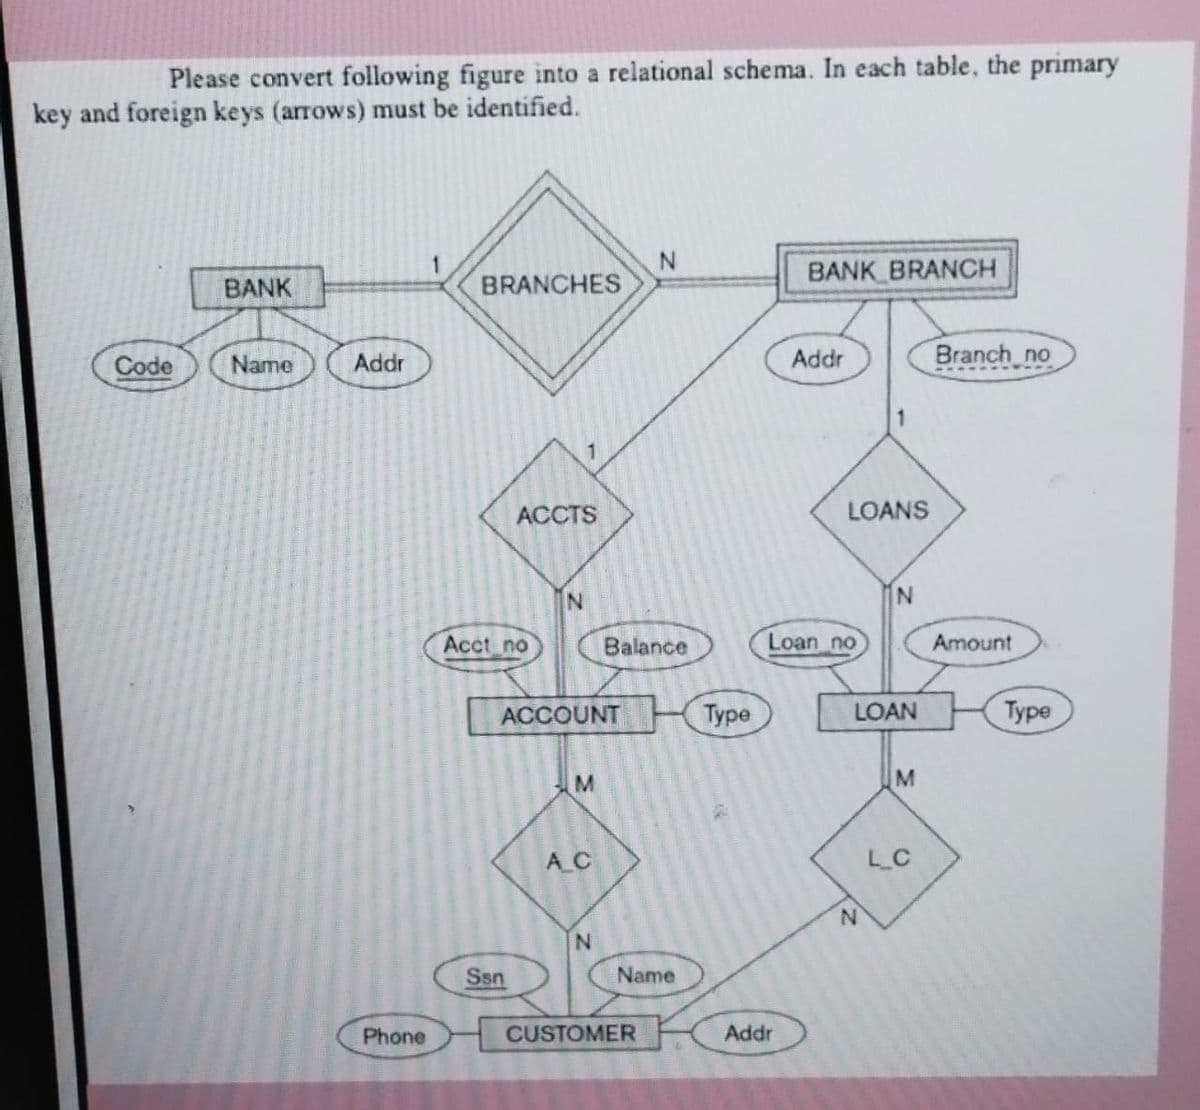 Please convert following figure into a relational schema. In each table, the primary
key and foreign keys (arrows) must be identified.
N.
BRANCHES
BANK BRANCH
BANK
Code
Name
Addr
Addr
Branch no
ACCTS
LOANS
Acct no
Balance
Loan no
Amount
ACCOUNT
Турe
LOAN
Туре
M
A C
L_C
N.
N.
Ssn
Name
Phone
CUSTOMER
Addr
